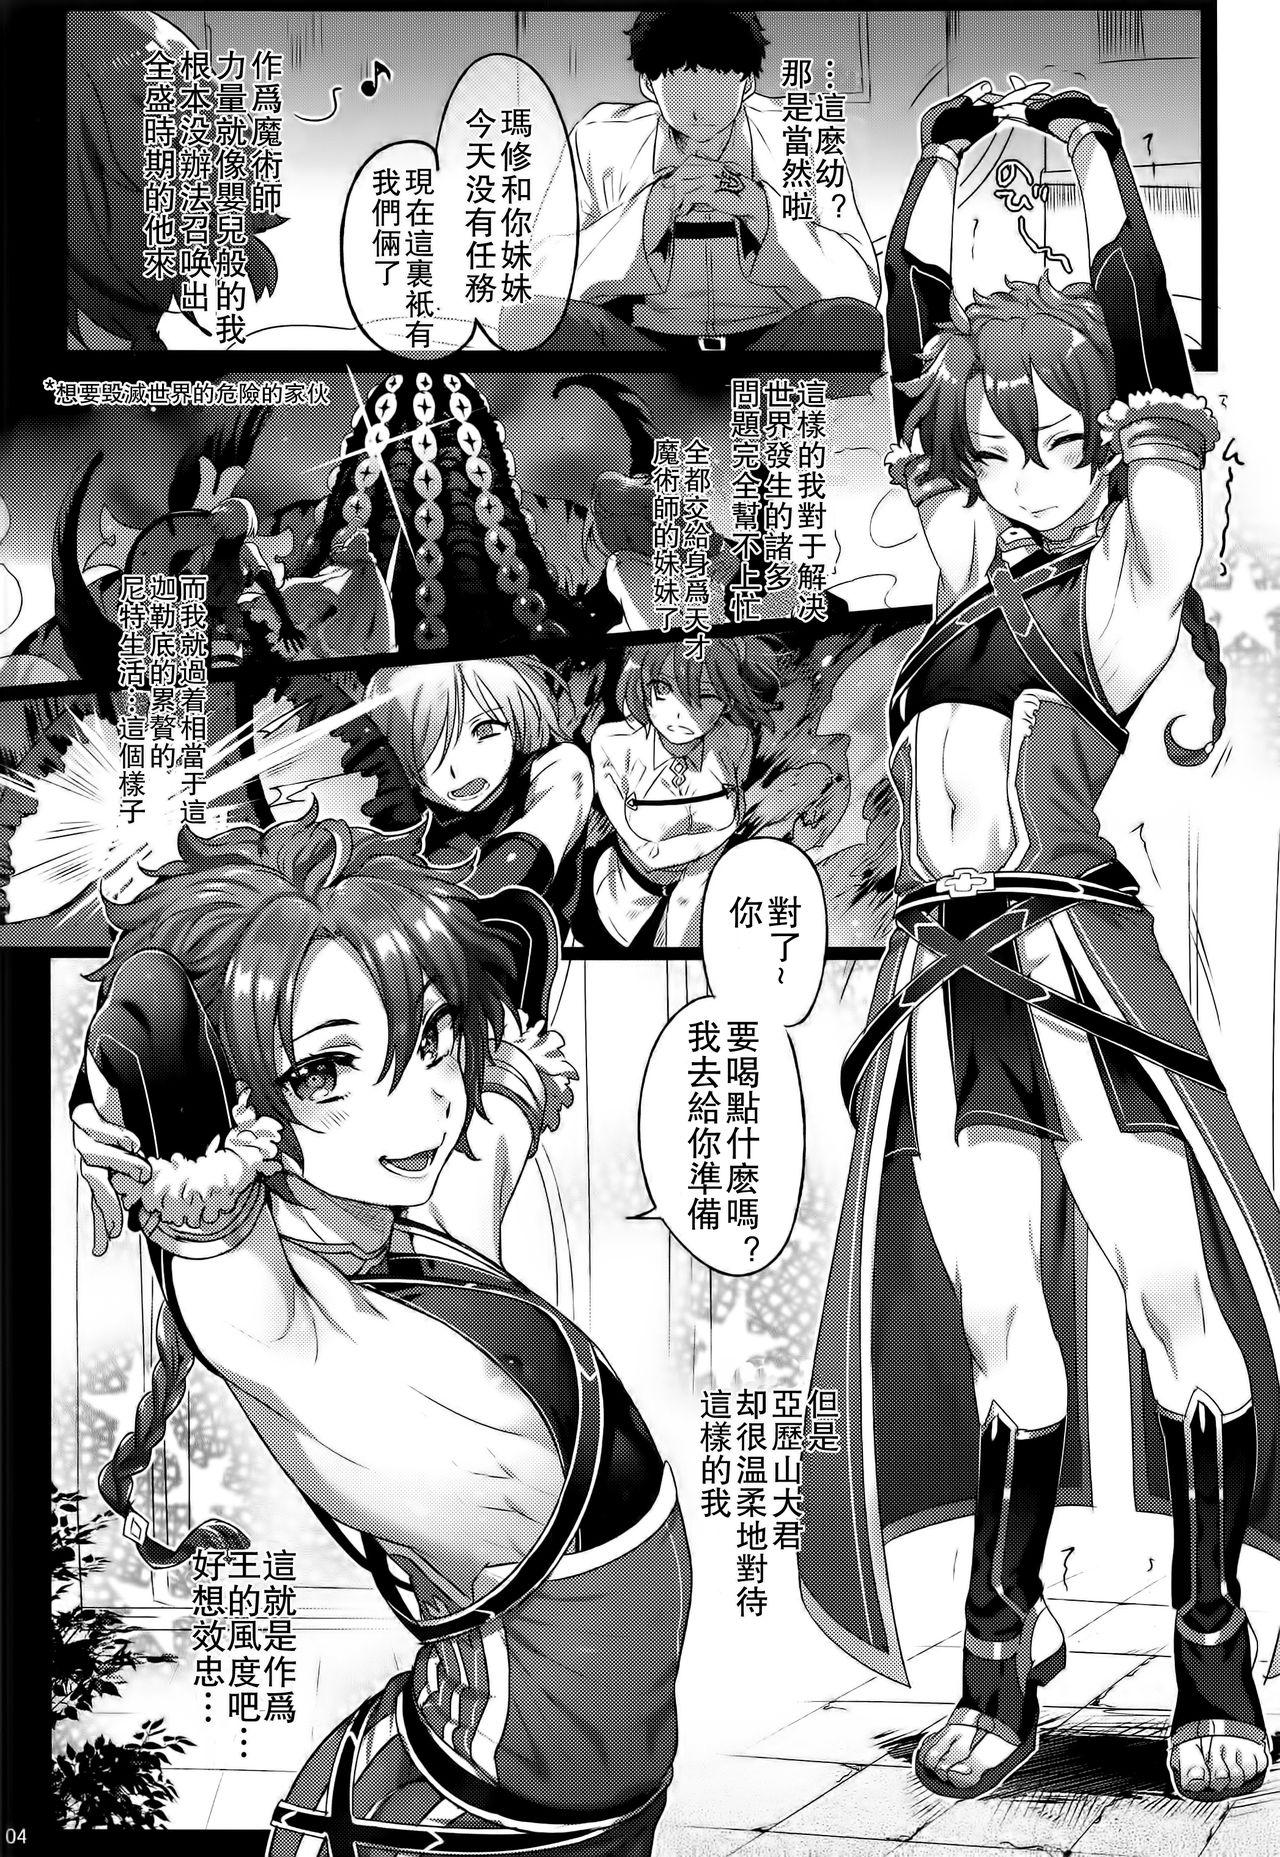 Joven Fate/DTorder course:Alexander - Fate grand order 8teen - Page 4